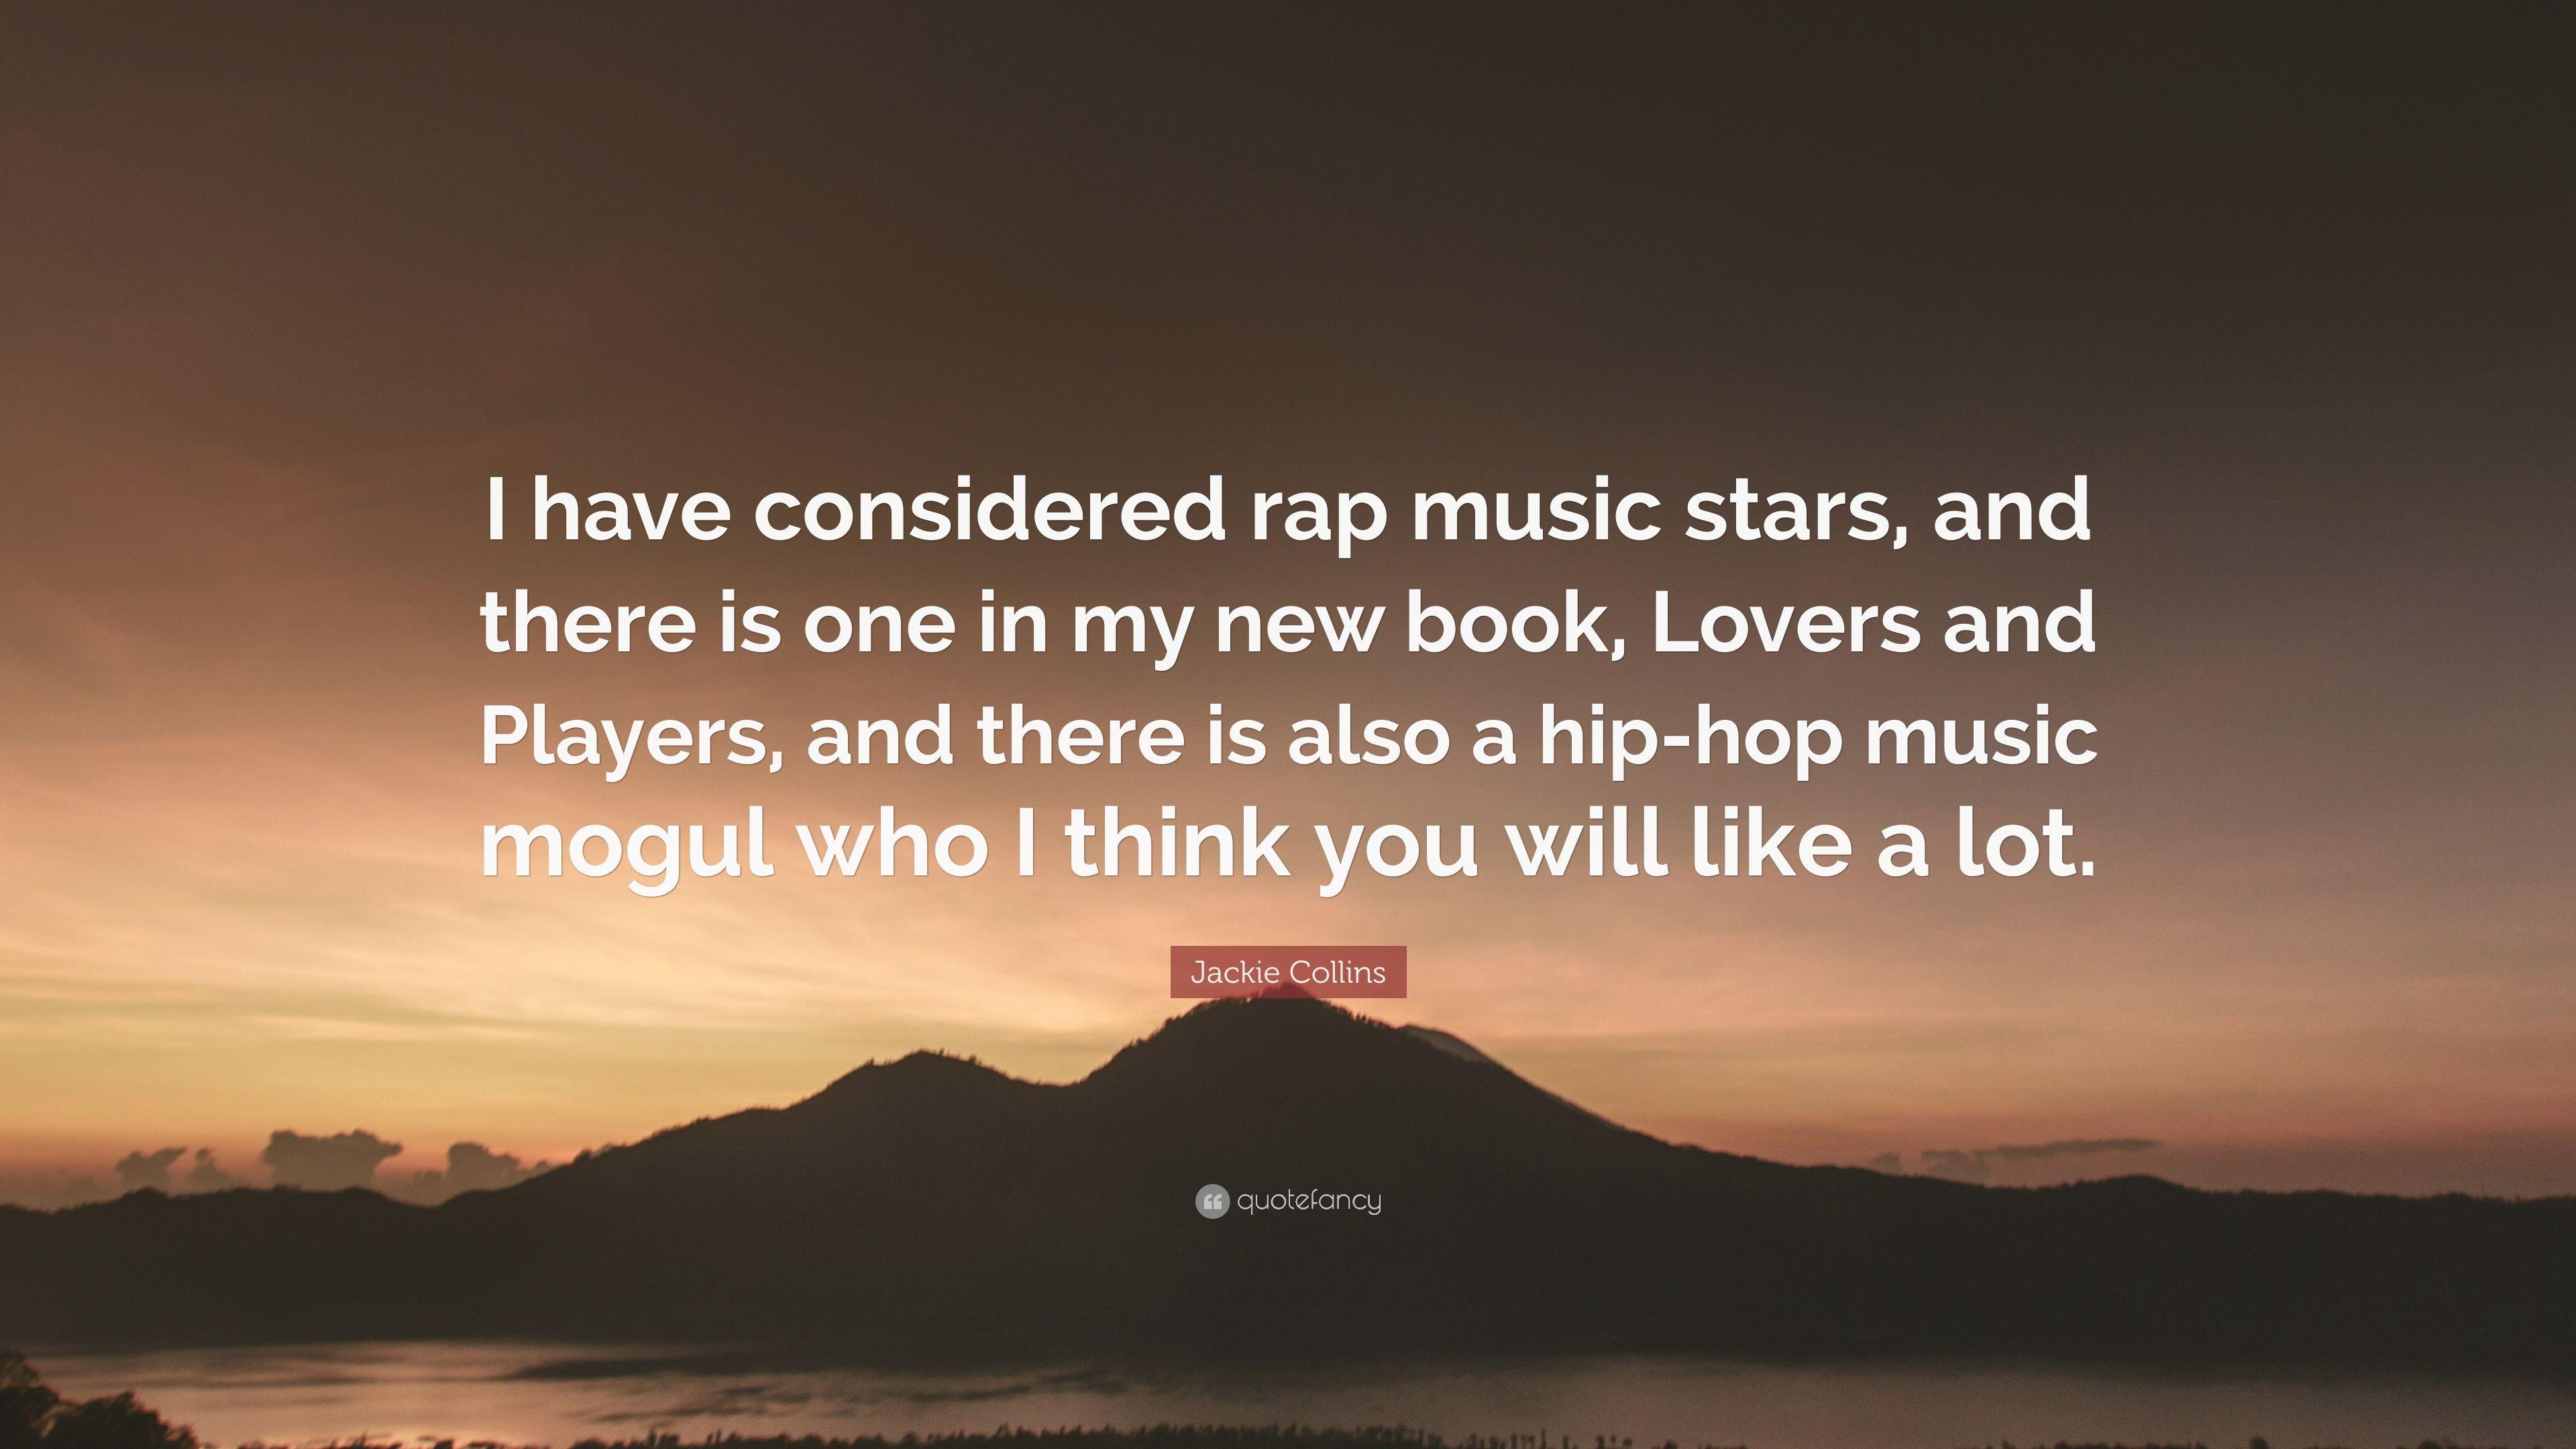 Jackie Collins Quote: “I have considered rap music stars, and there